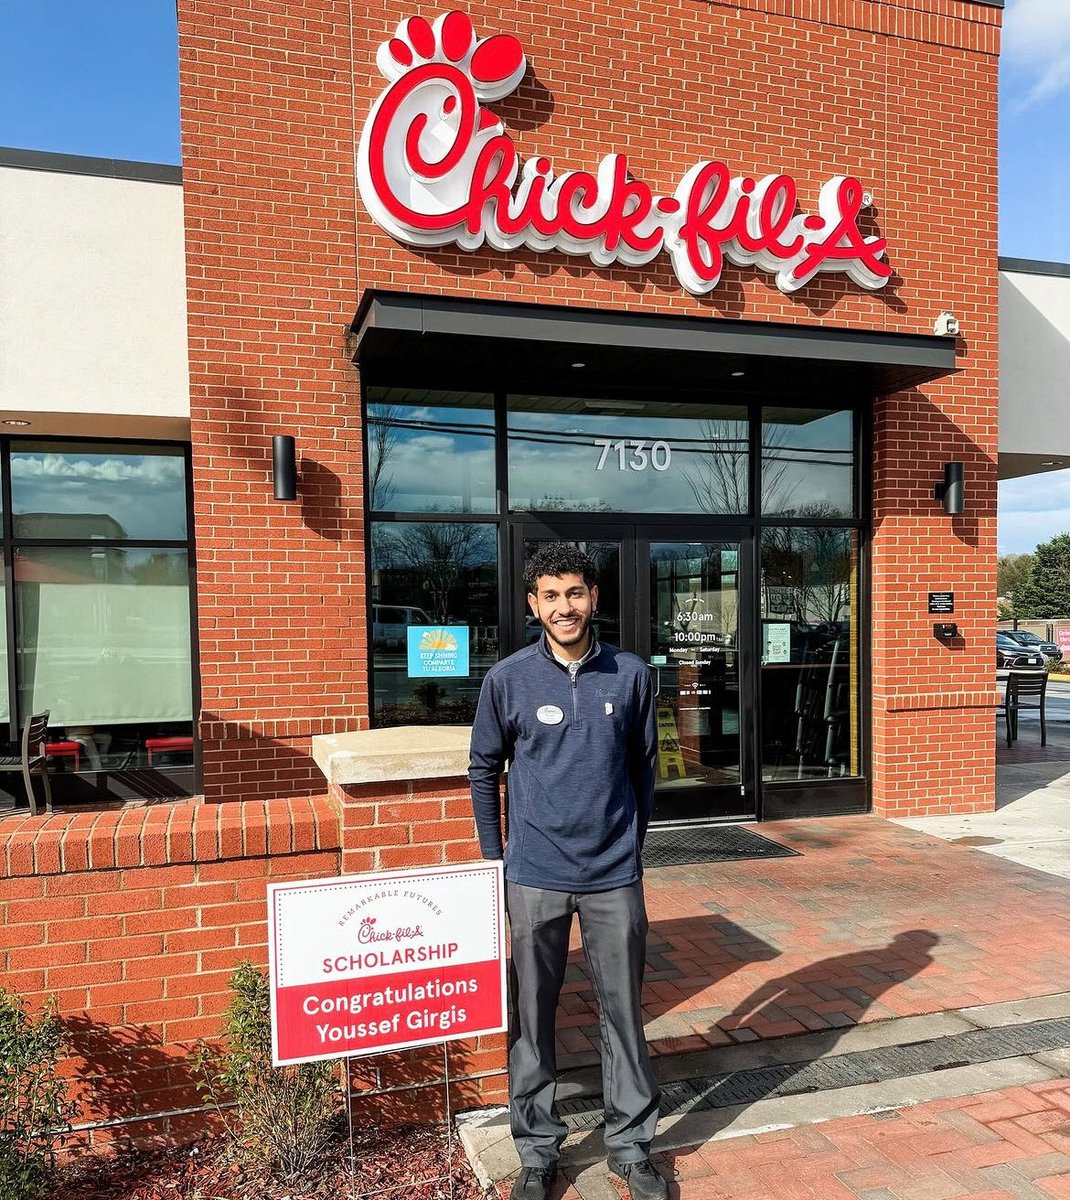 🎓🌟 Huge congrats to Youssef Girgis for graduating early and snagging the 'Remarkable Futures Scholarship' from Chick-fil-A! 🐔🚀 Now pursuing Mechanical Engineering at NOVA with dreams of his own company!